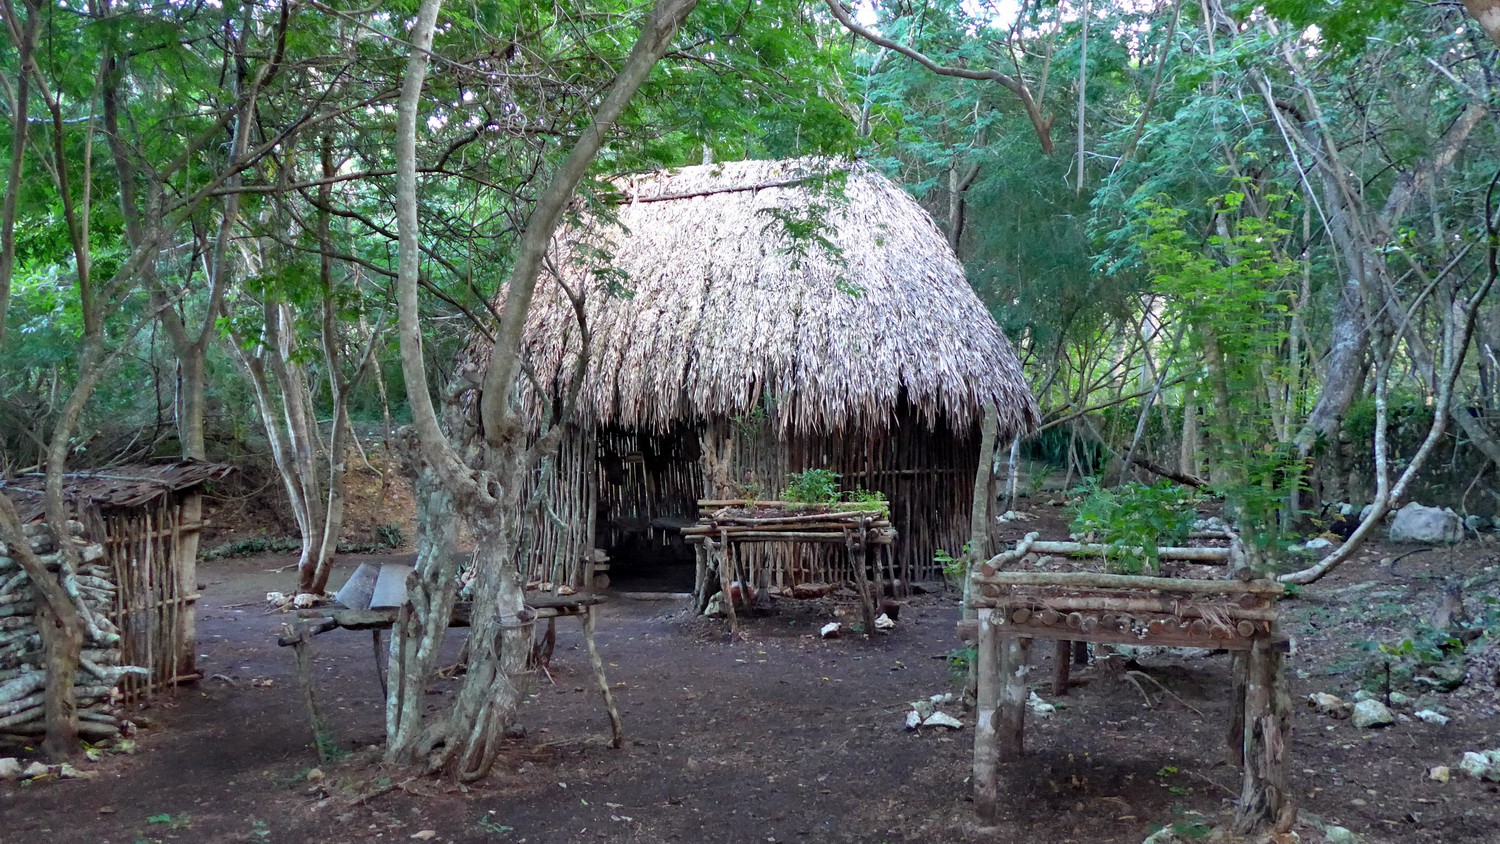 Typical shelter of the indigenous Maya people